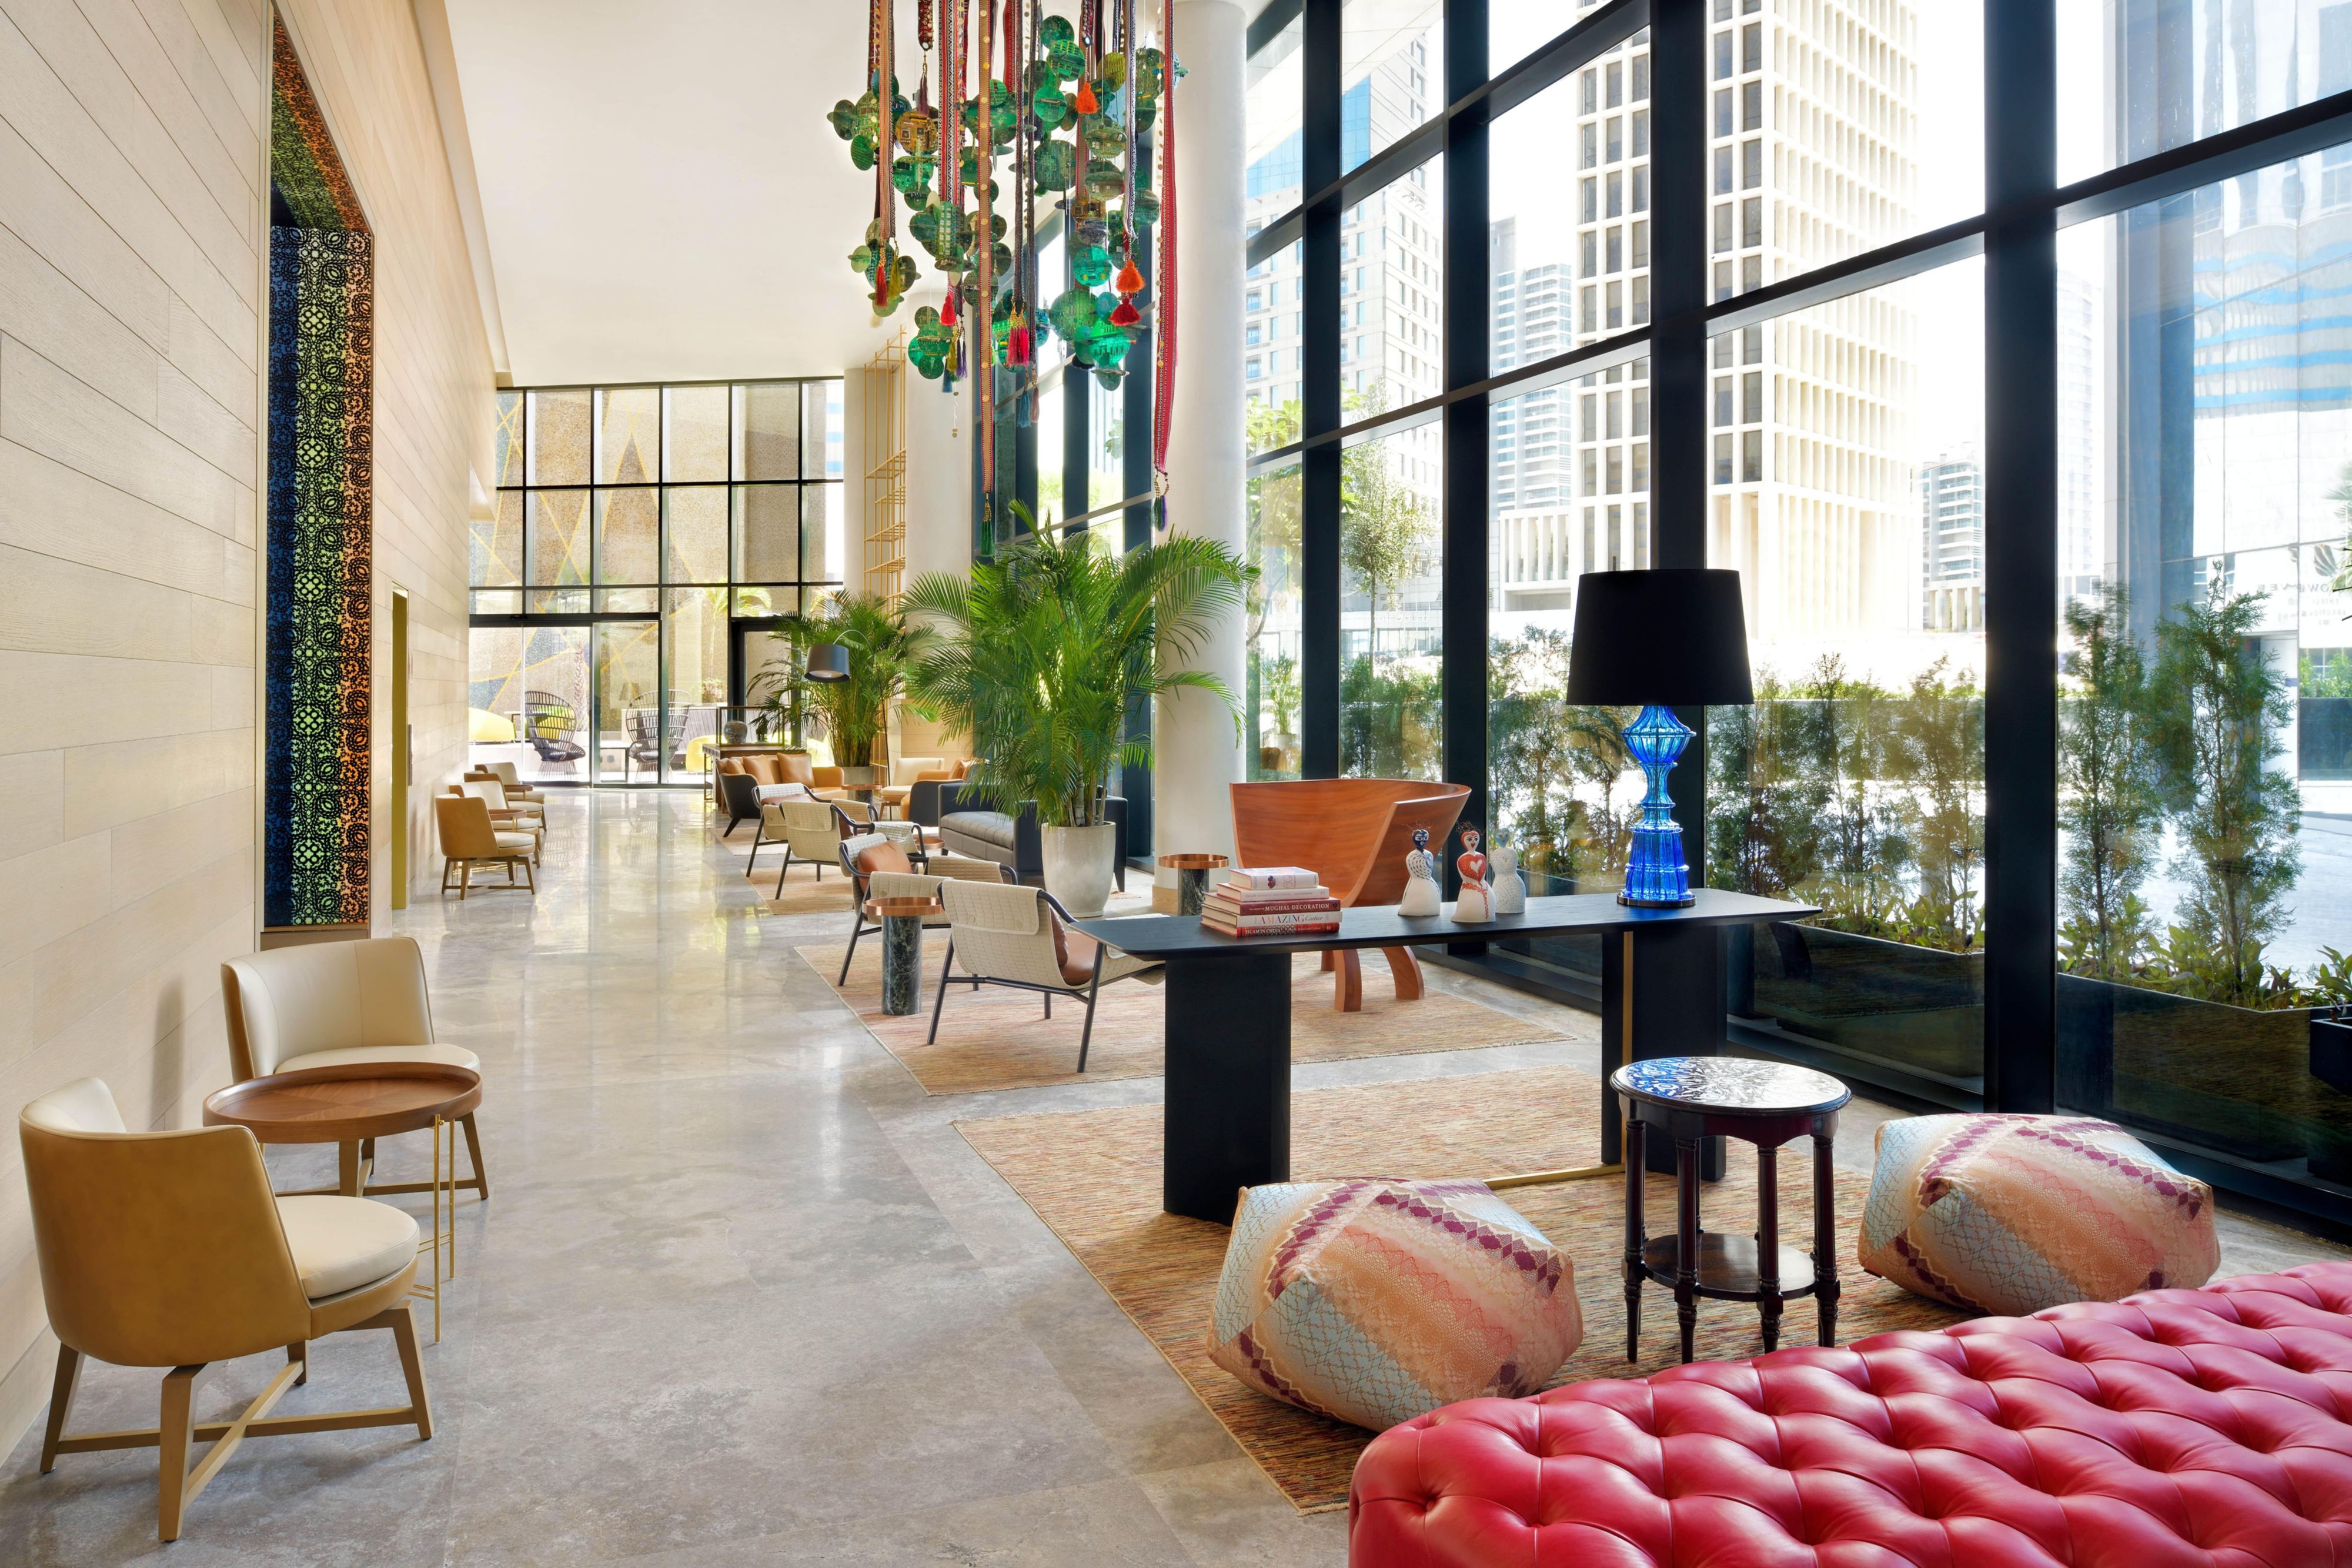 Let us introduce you to the art, design, stories and histories that make up our art boutique Hotel Indigo Dubai Downtown!

Whether you’re drawn to fine art, hungry for cultural experiences, or just curious about our collections, we've got you covered with over 200 original artworks.

Book your experience!